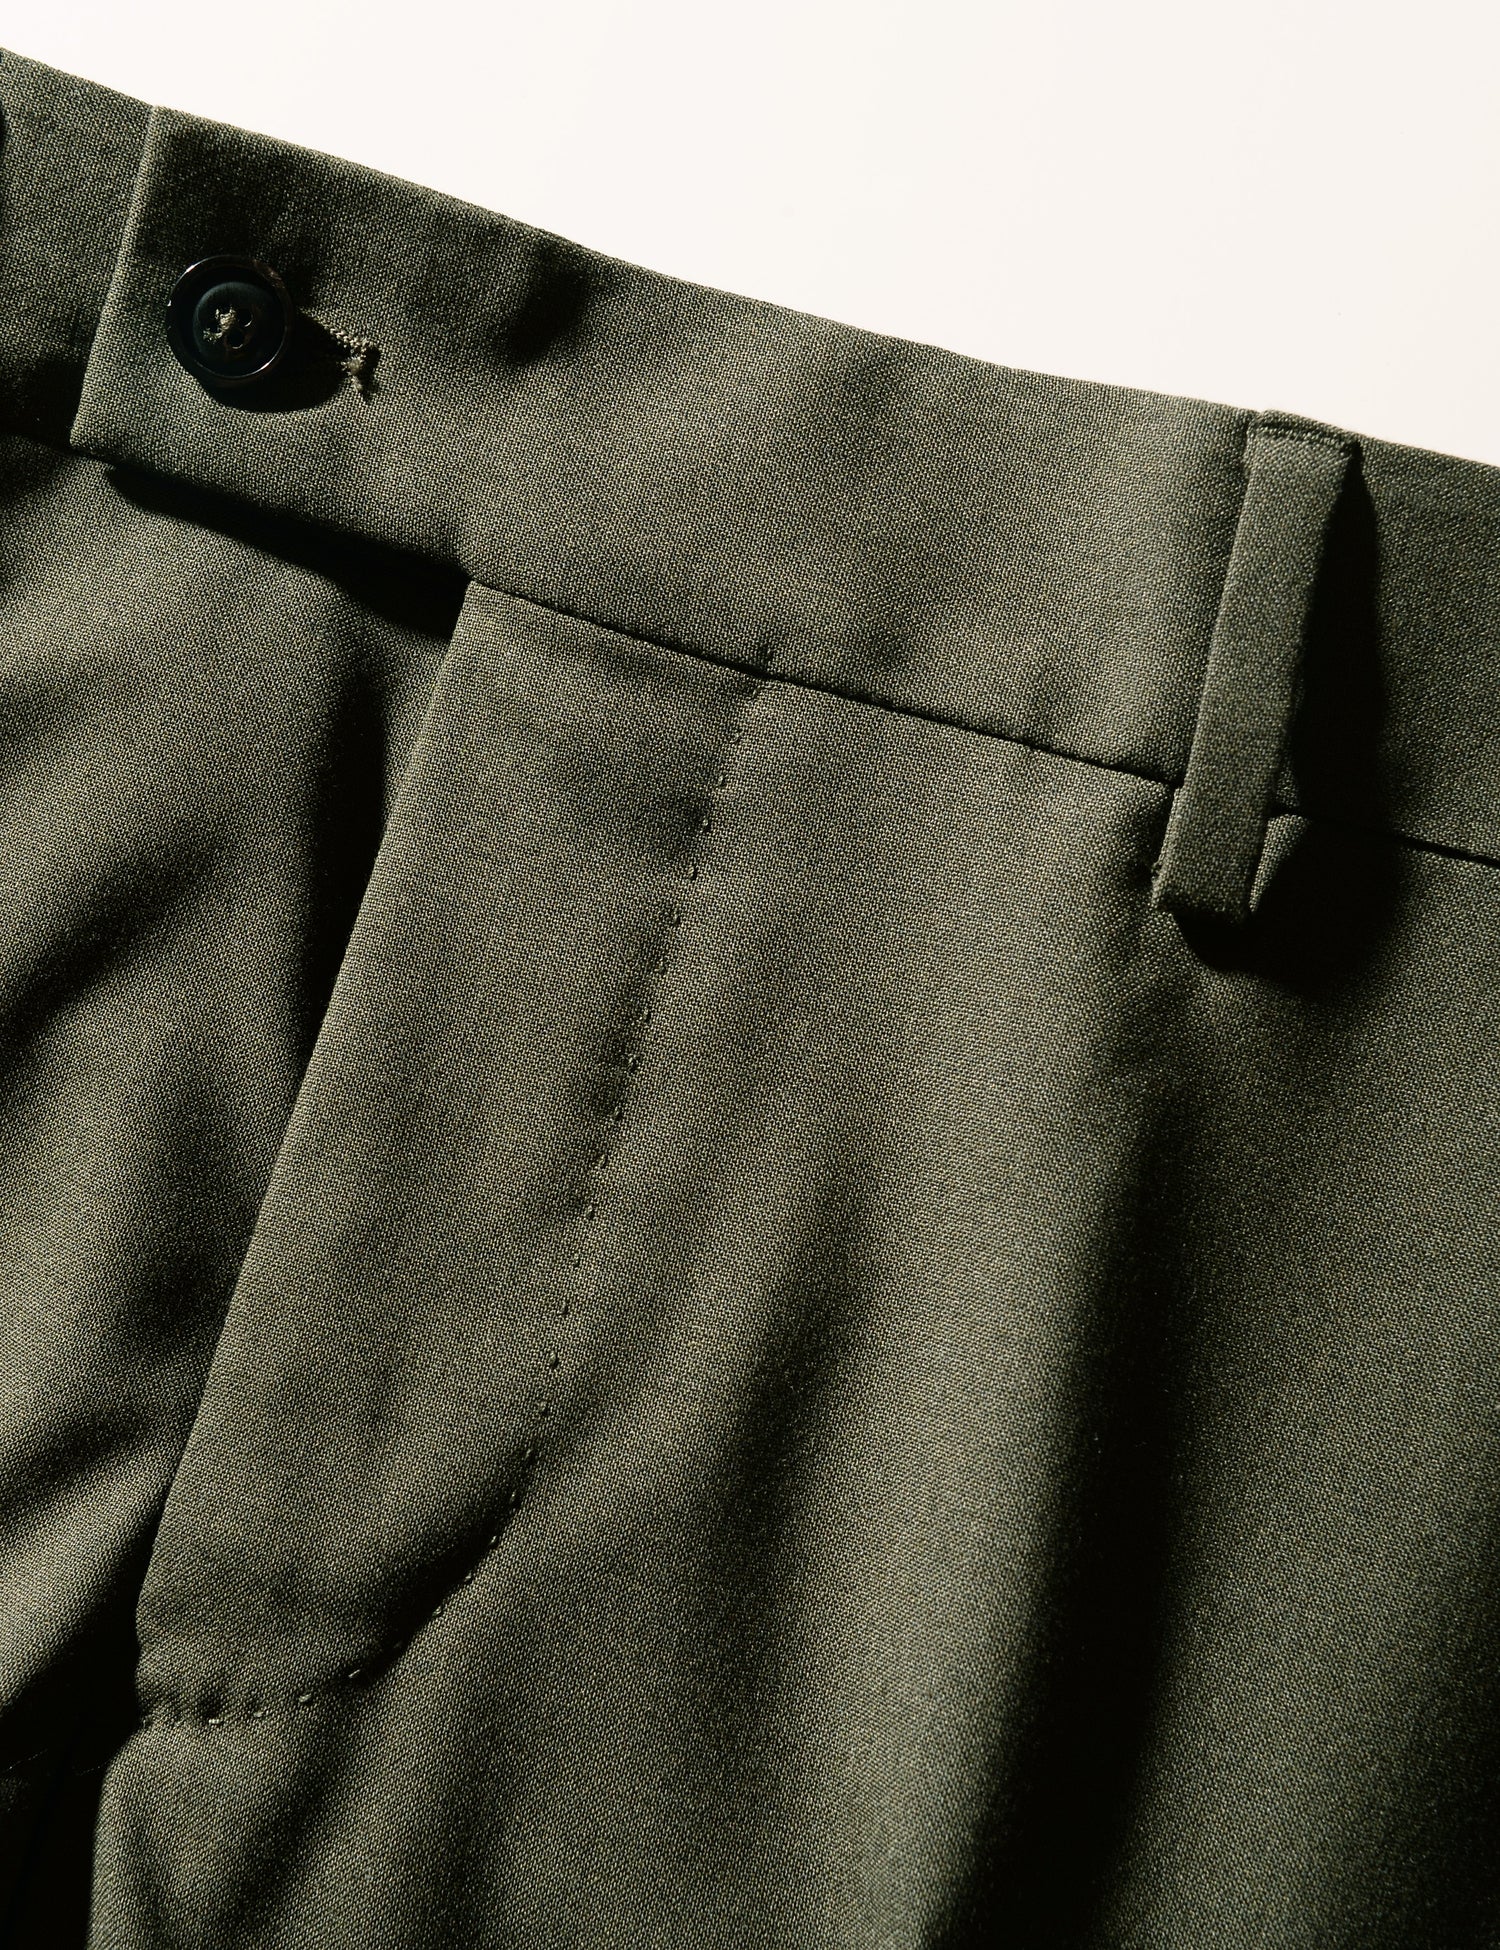 Detail shot of Brooklyn Tailors BKT50 Tailored Trousers in 14.5 Micron Mouliné - Agave Green showing waistband 